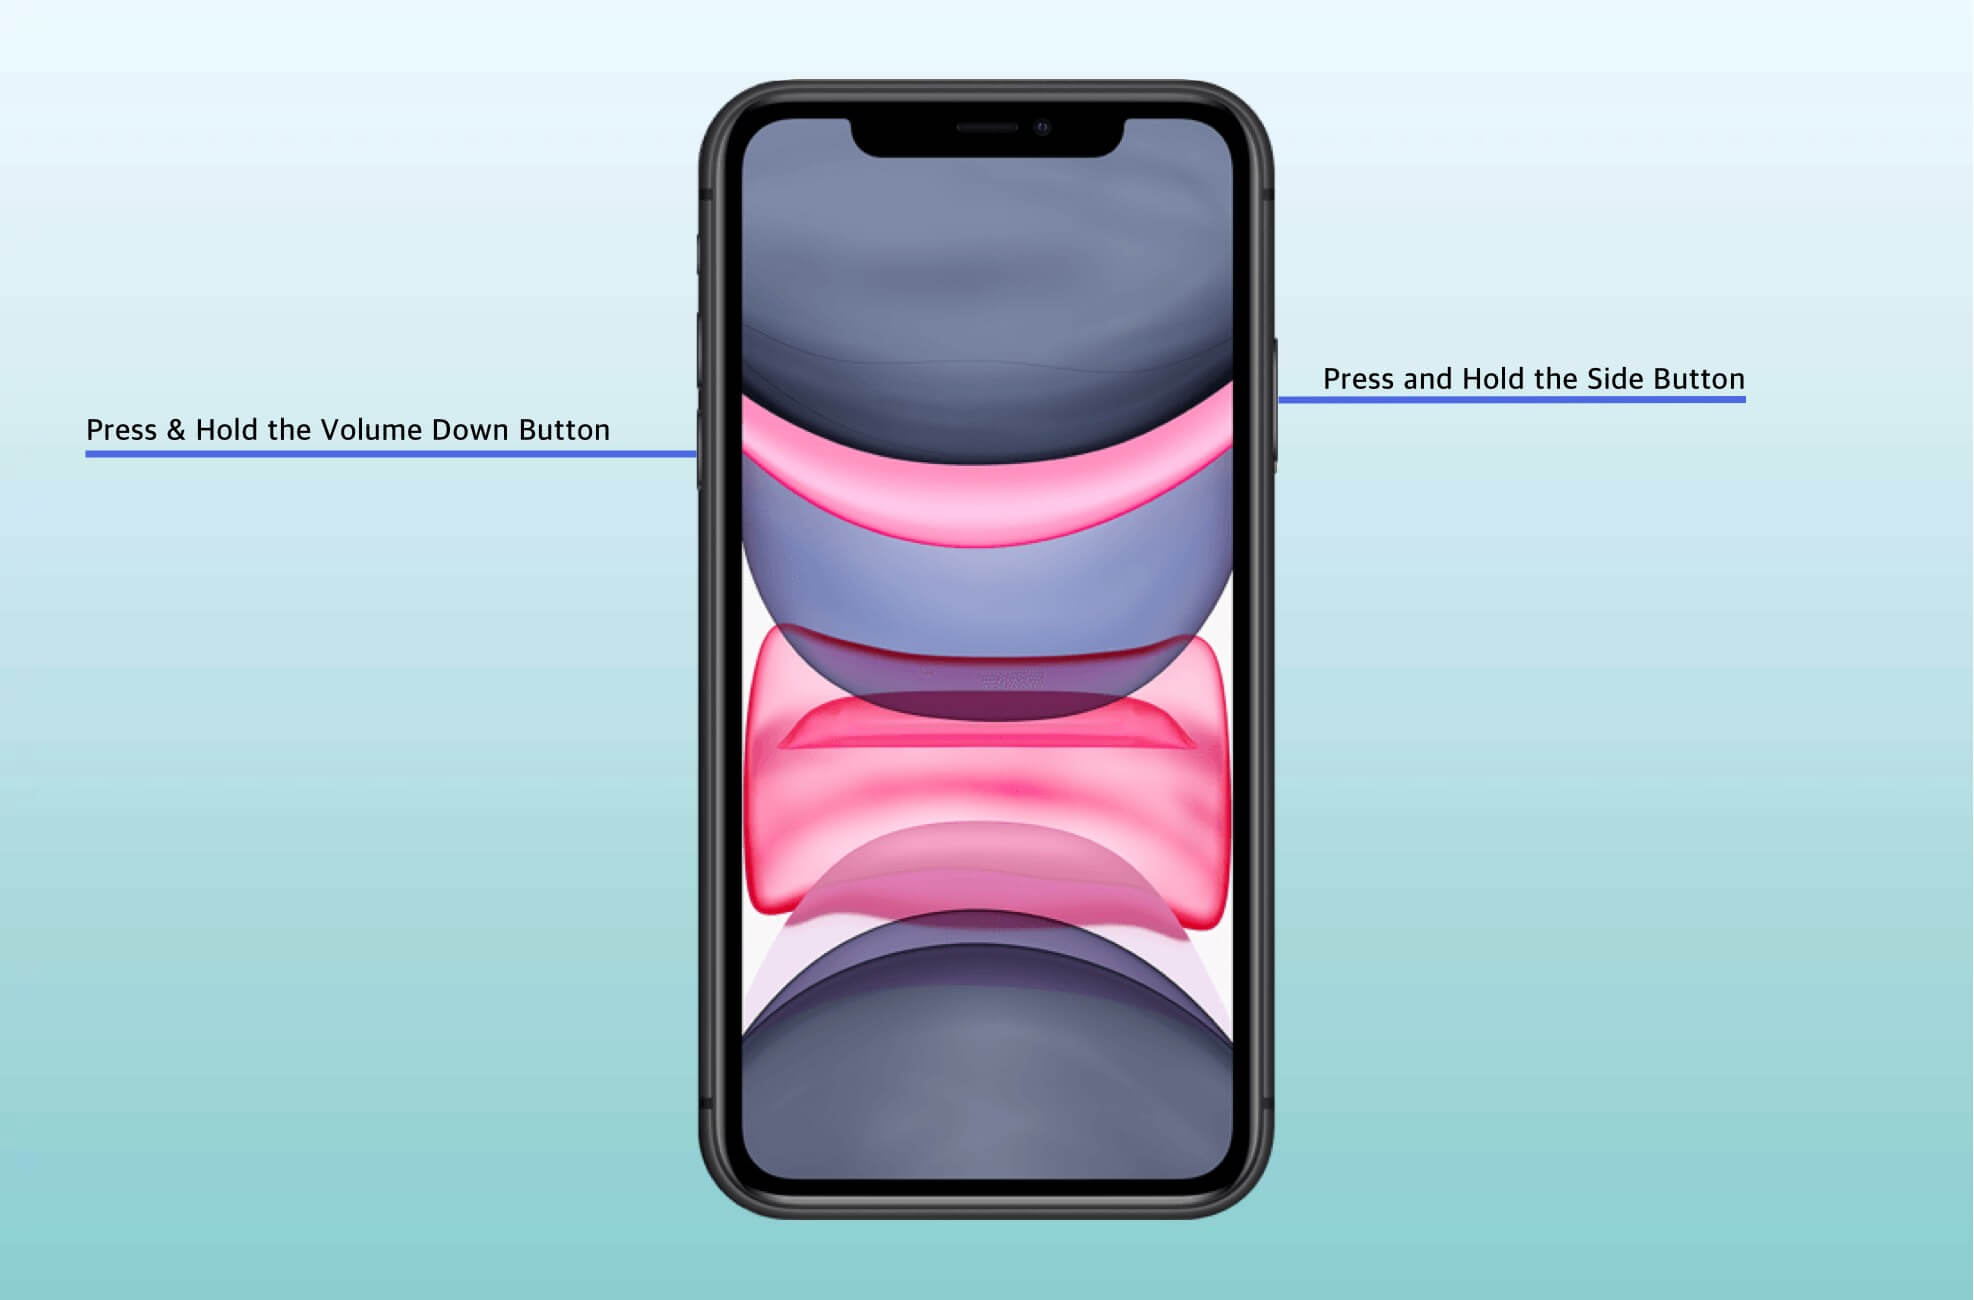 Press & Hold the Side Button Volume Down Button on iPhone 11